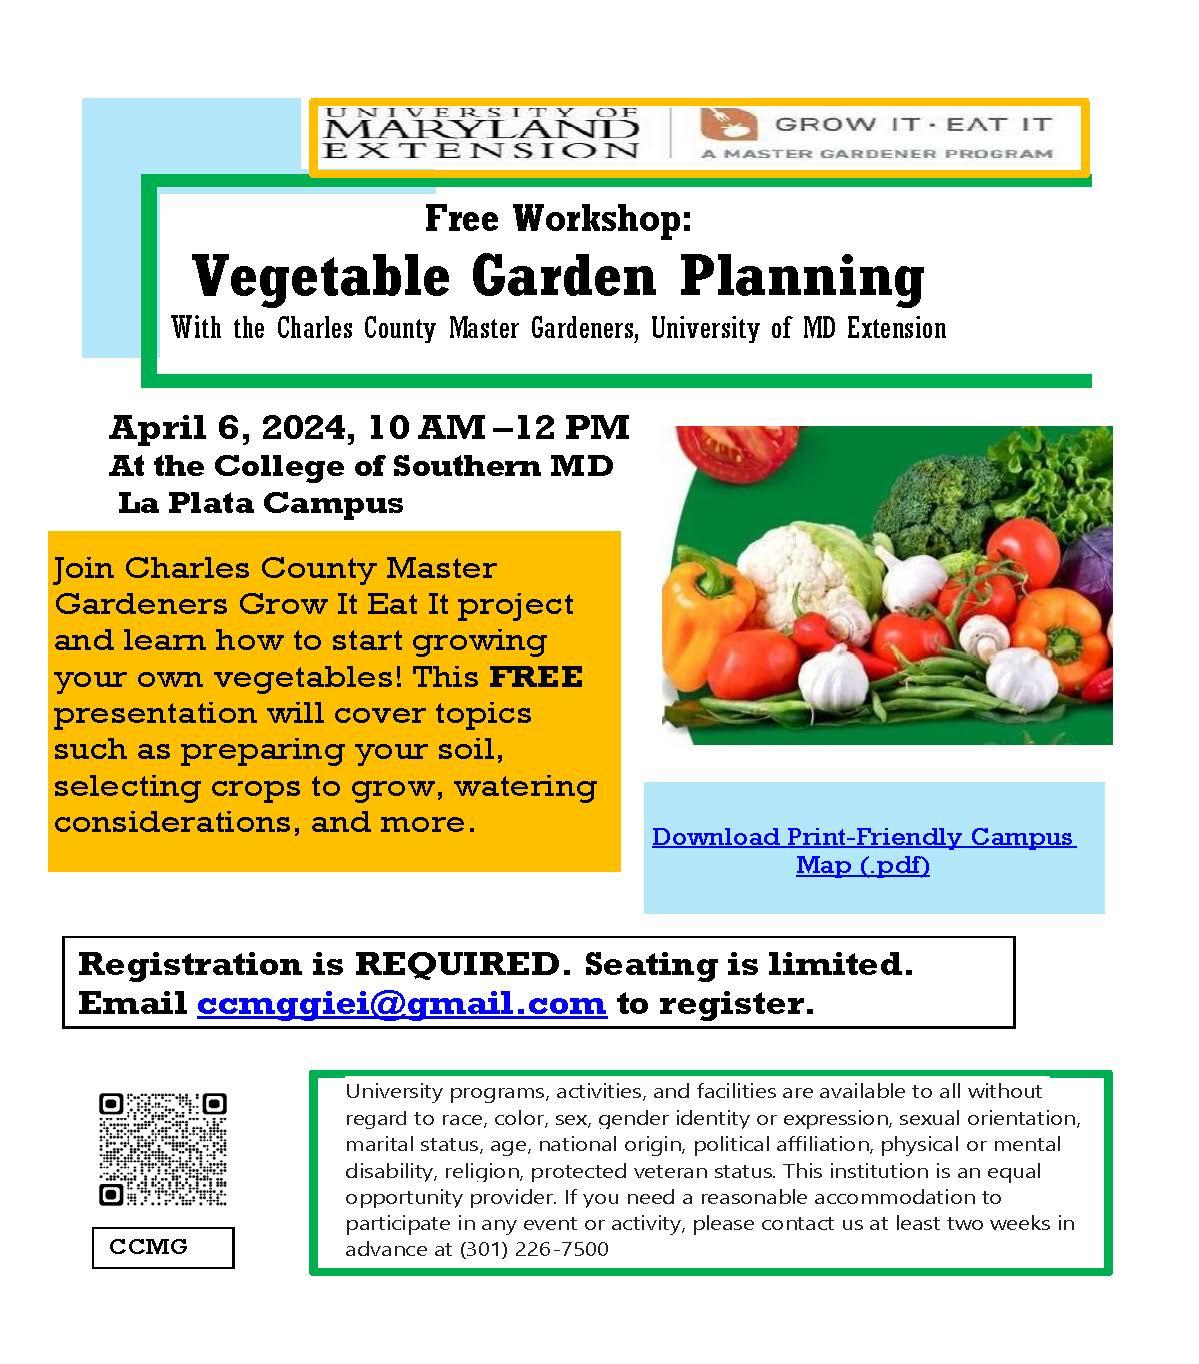 Vegetable Garden Planning on April 6, 2024, at College of Southern Maryland